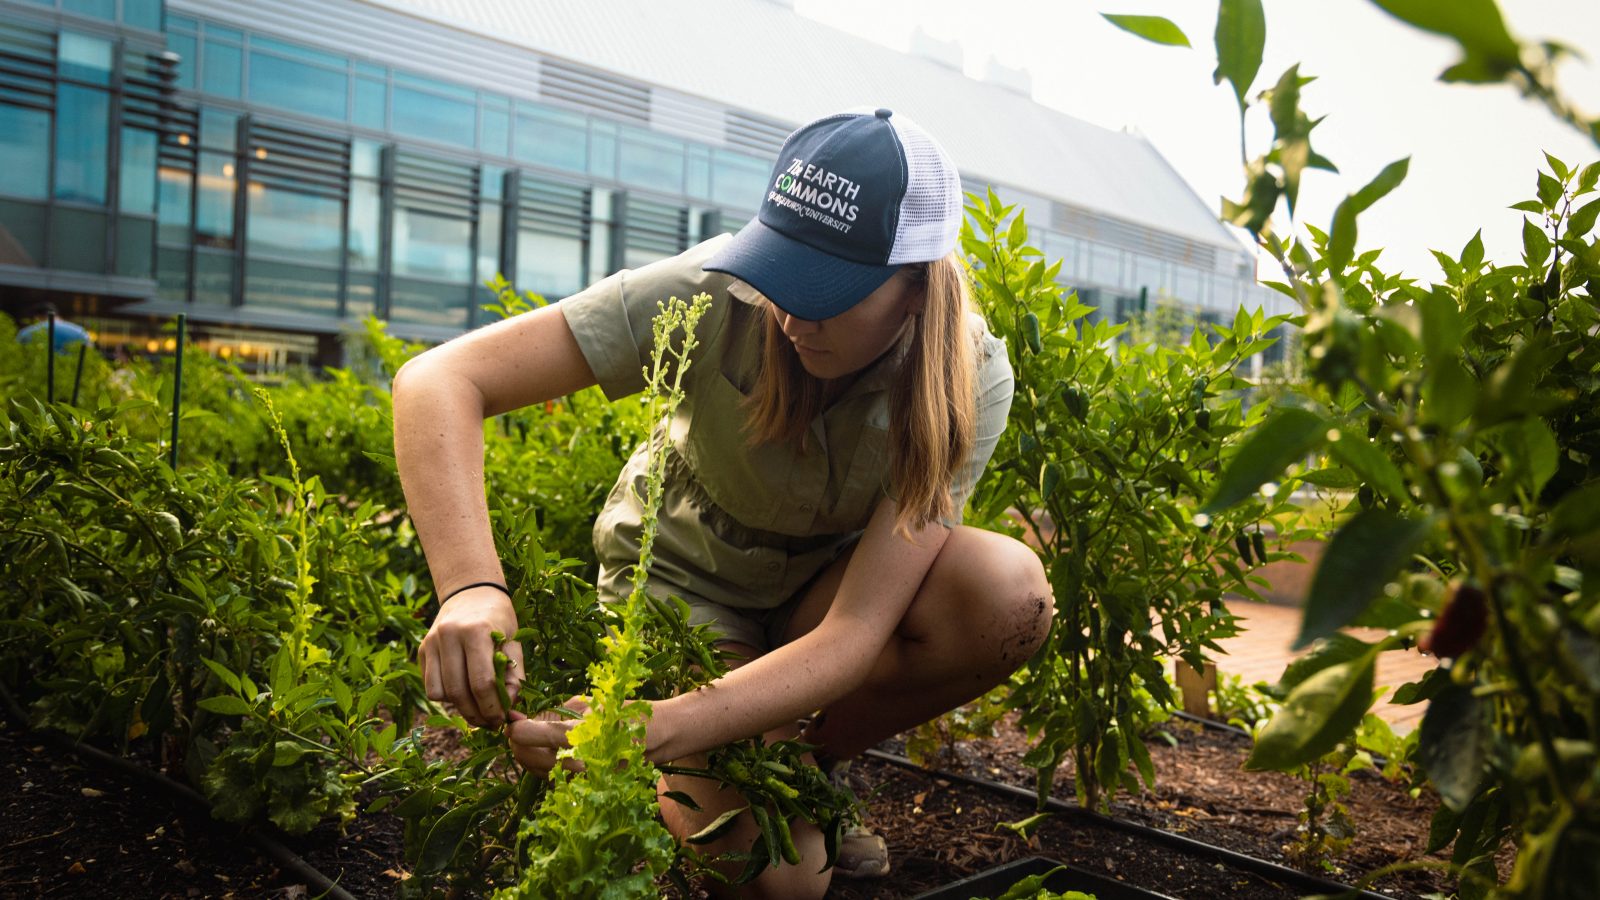 A young woman hunches over a basil plant in the middle of a garden on Georgetown&#039;s campus. She wears a blue baseball cap and a T-shirt and shorts.